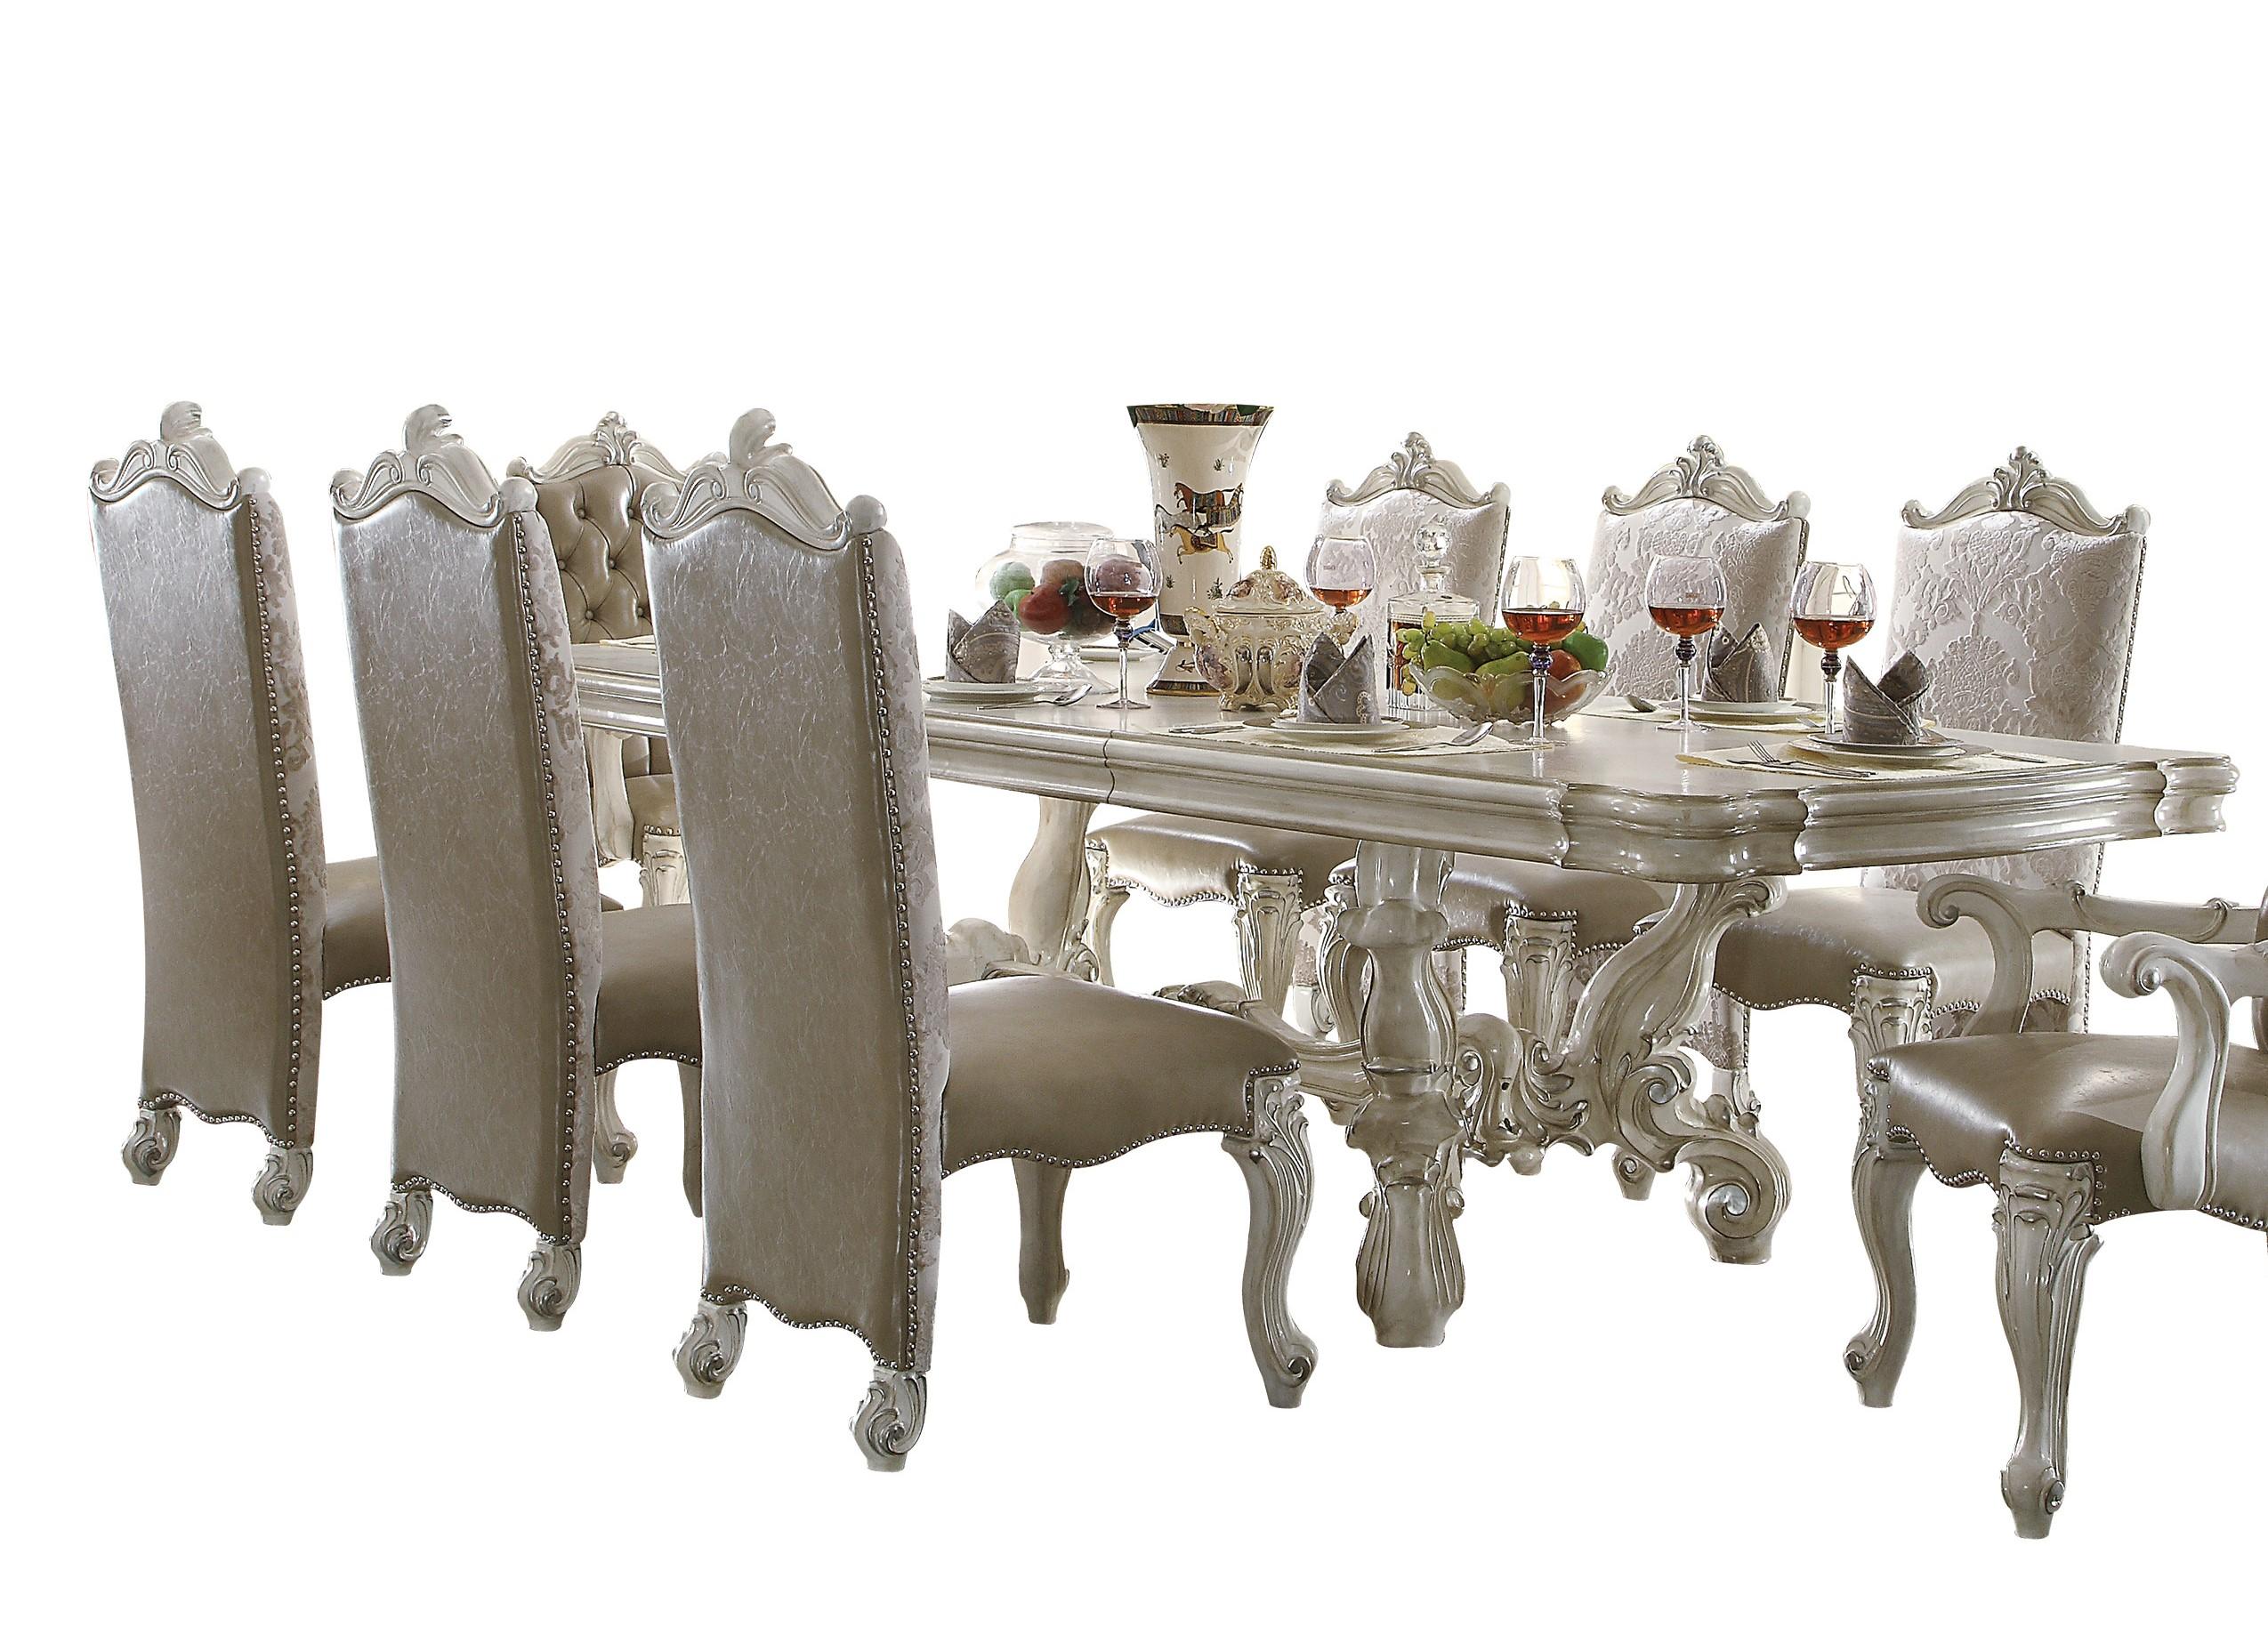 Classic, Traditional Dining Table Set Versailles 61130 / 61132 61130-DT-7PC in Bone, White Polyurethane